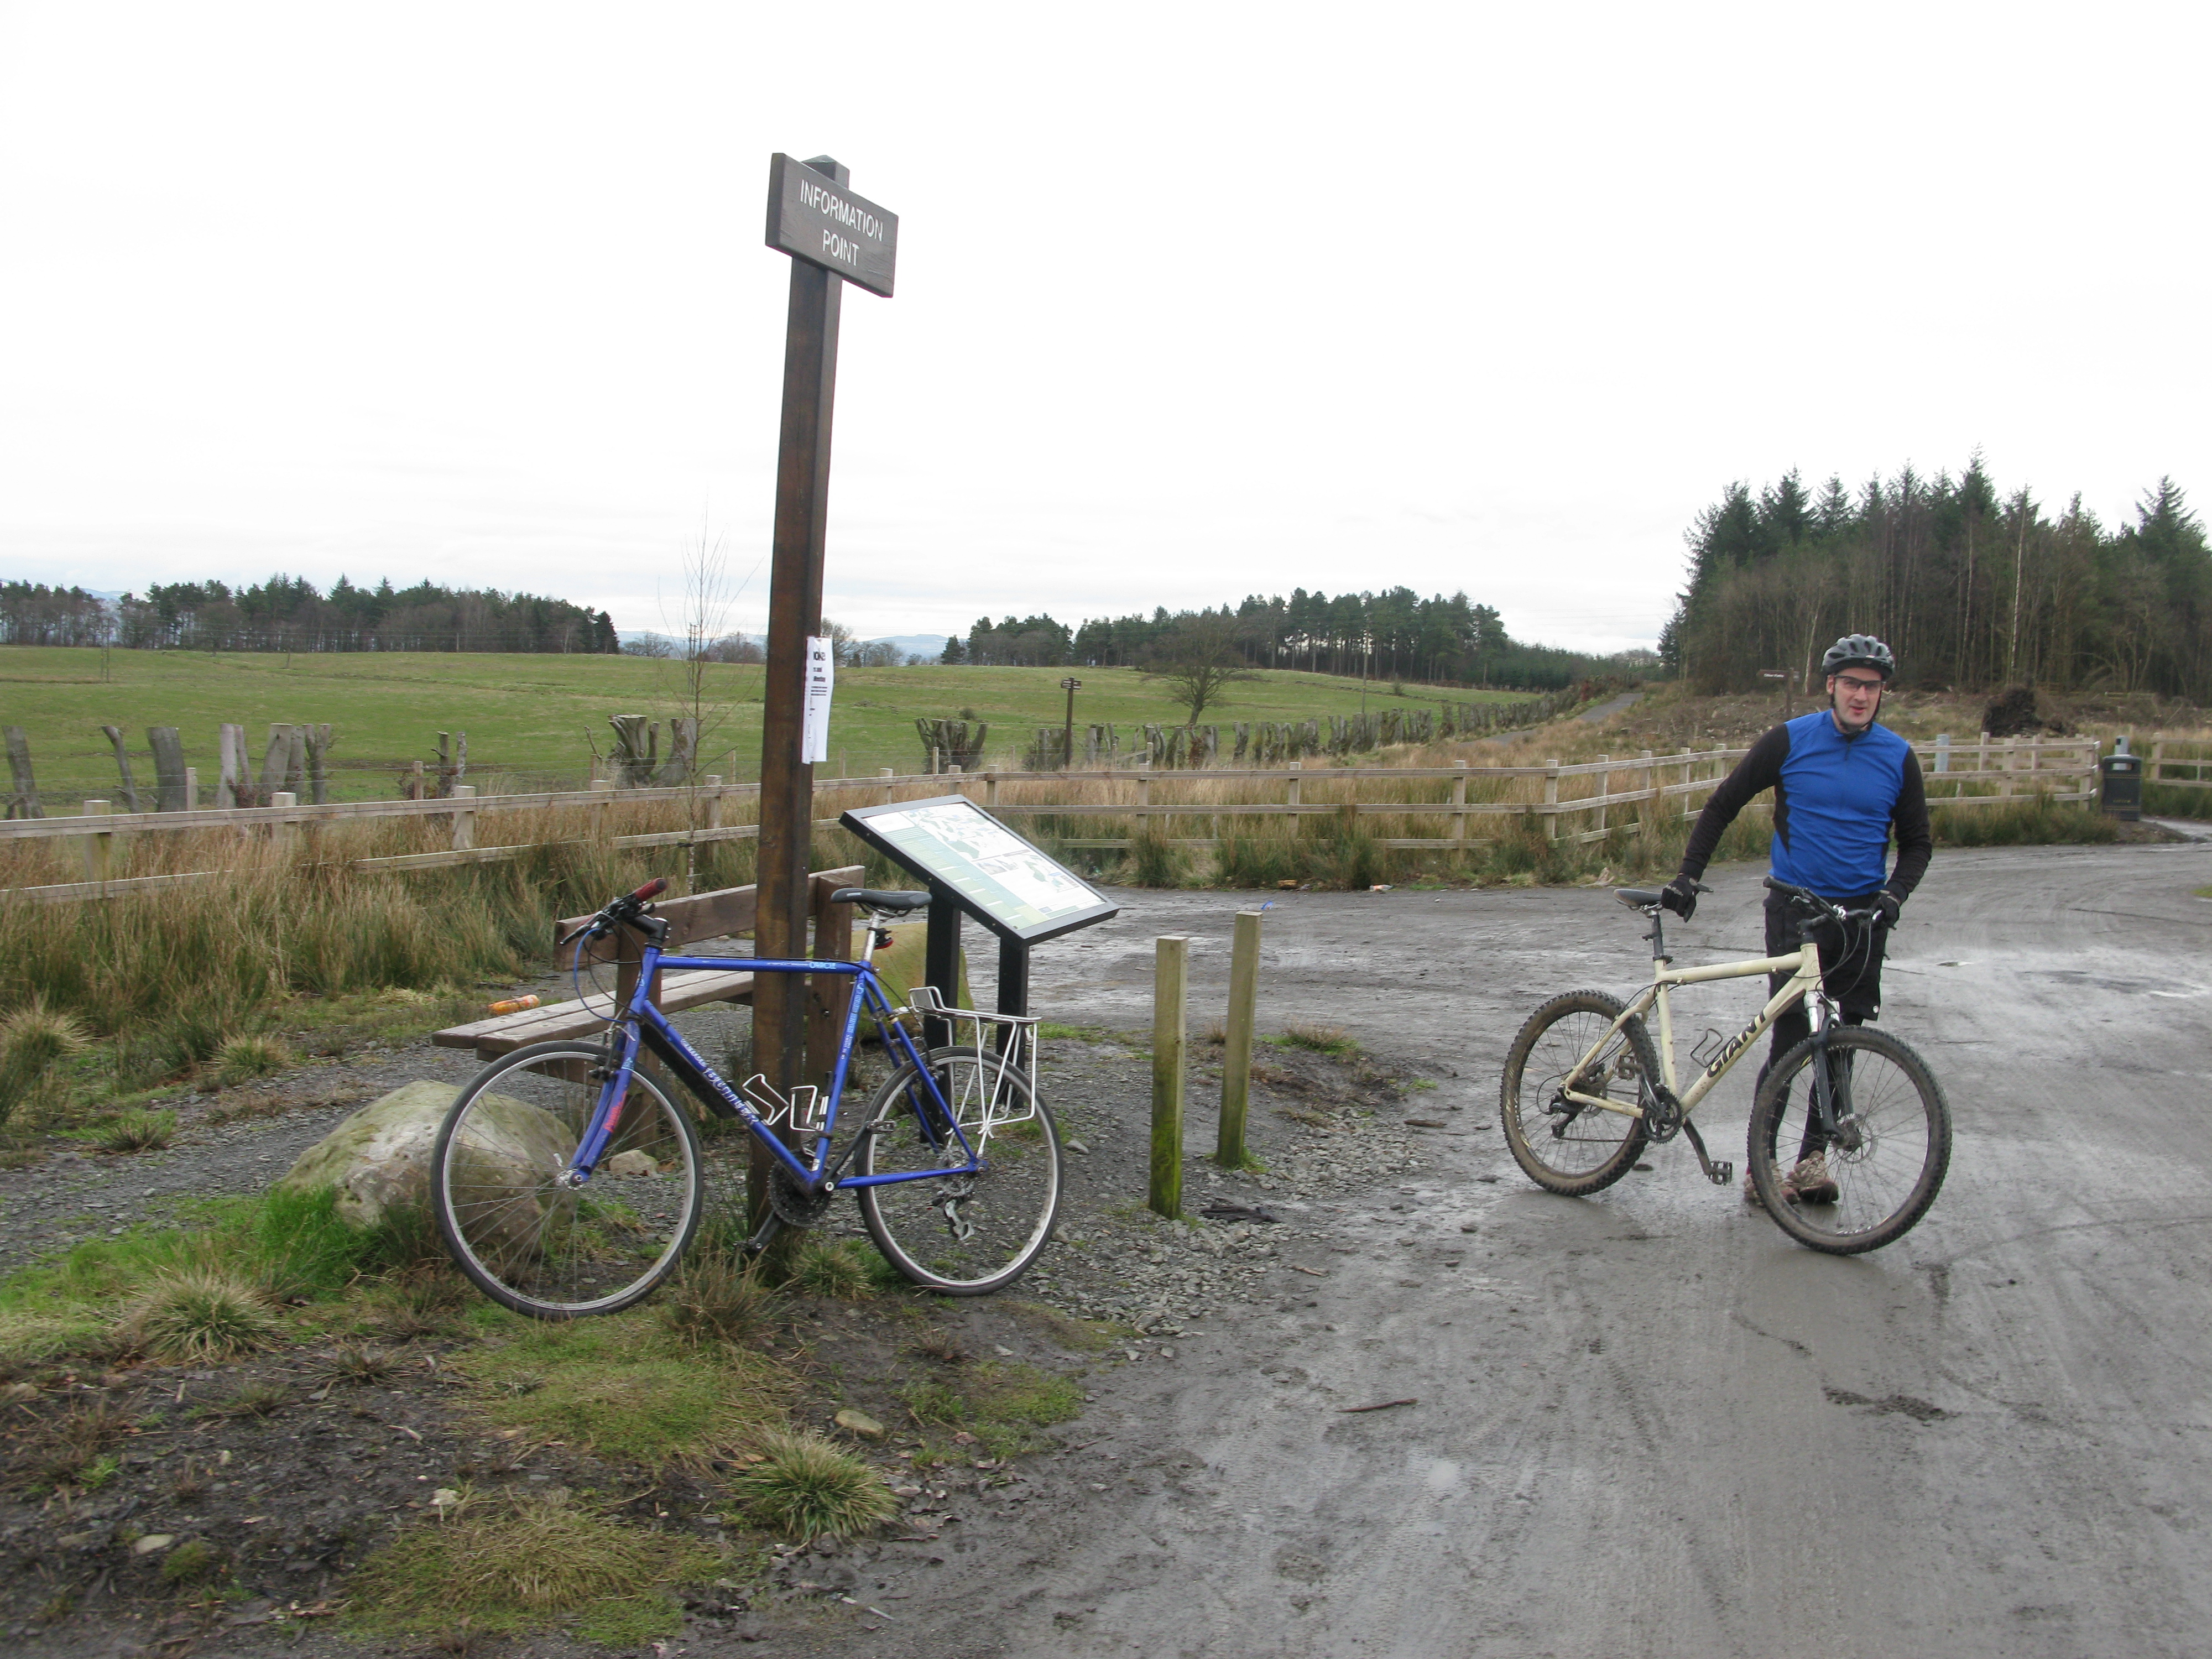 Man on bike on cycle path with signs